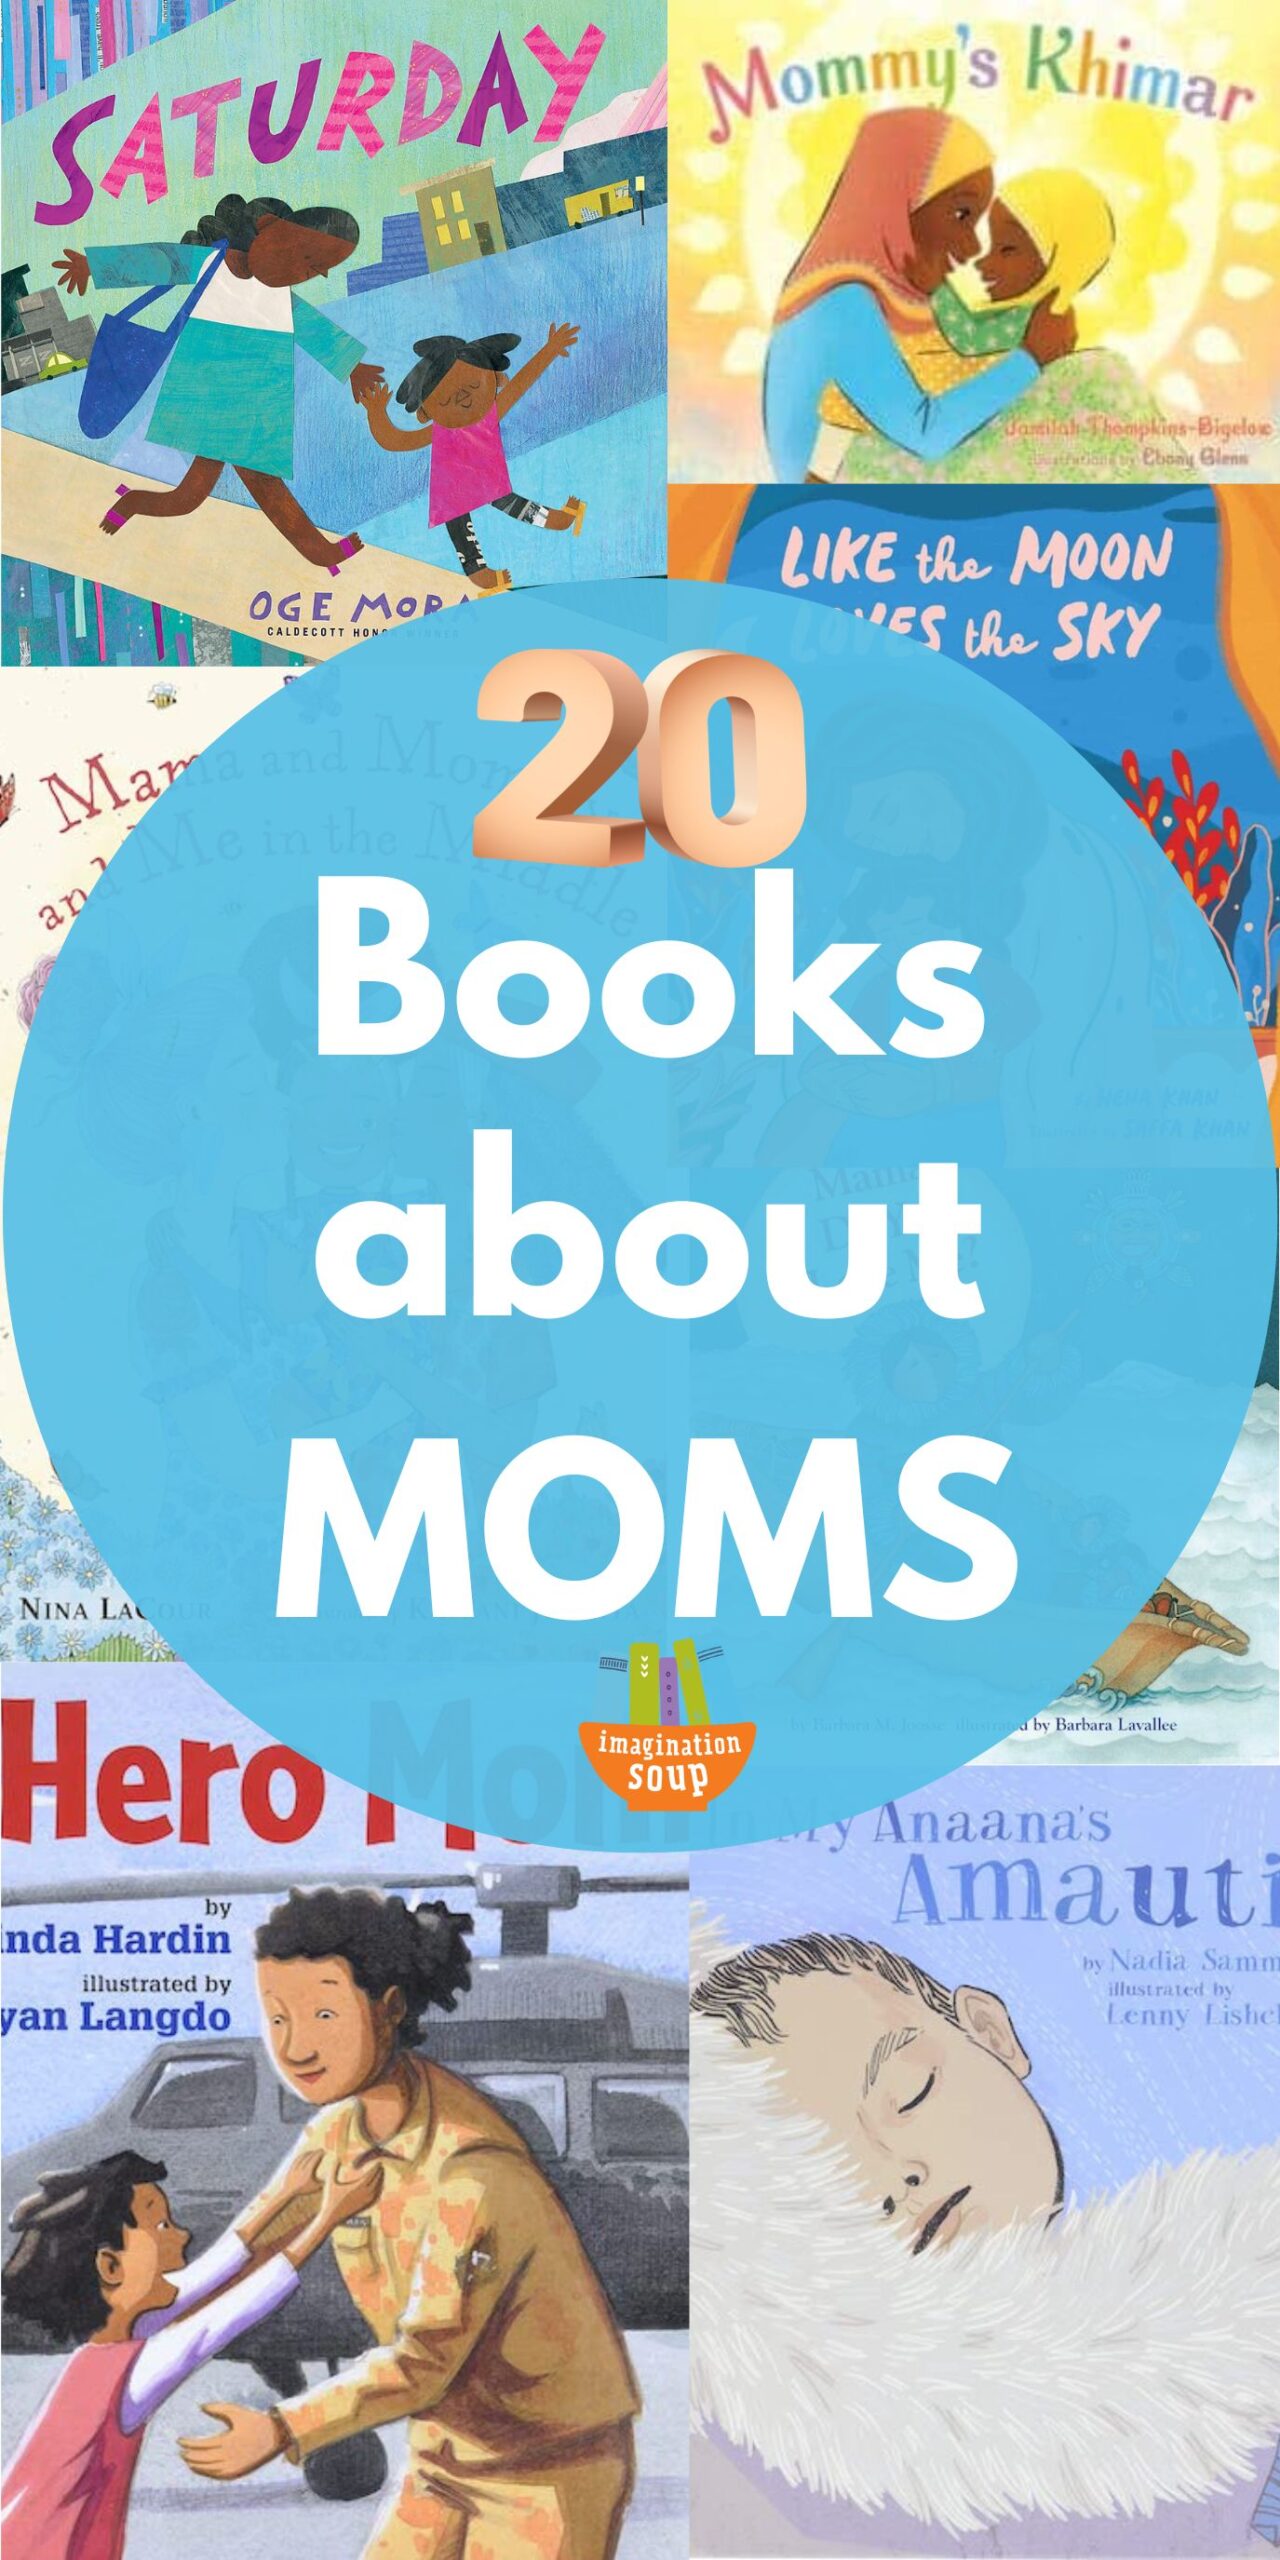 As a mom myself, I know how hard moms work! So what sweet books could you read and give for Mother's Day?
Any of these picture books about moms will be lovely to read as you celebrate Mother's Day. They will also make good gifts for a baby shower or other celebration for a Mom.